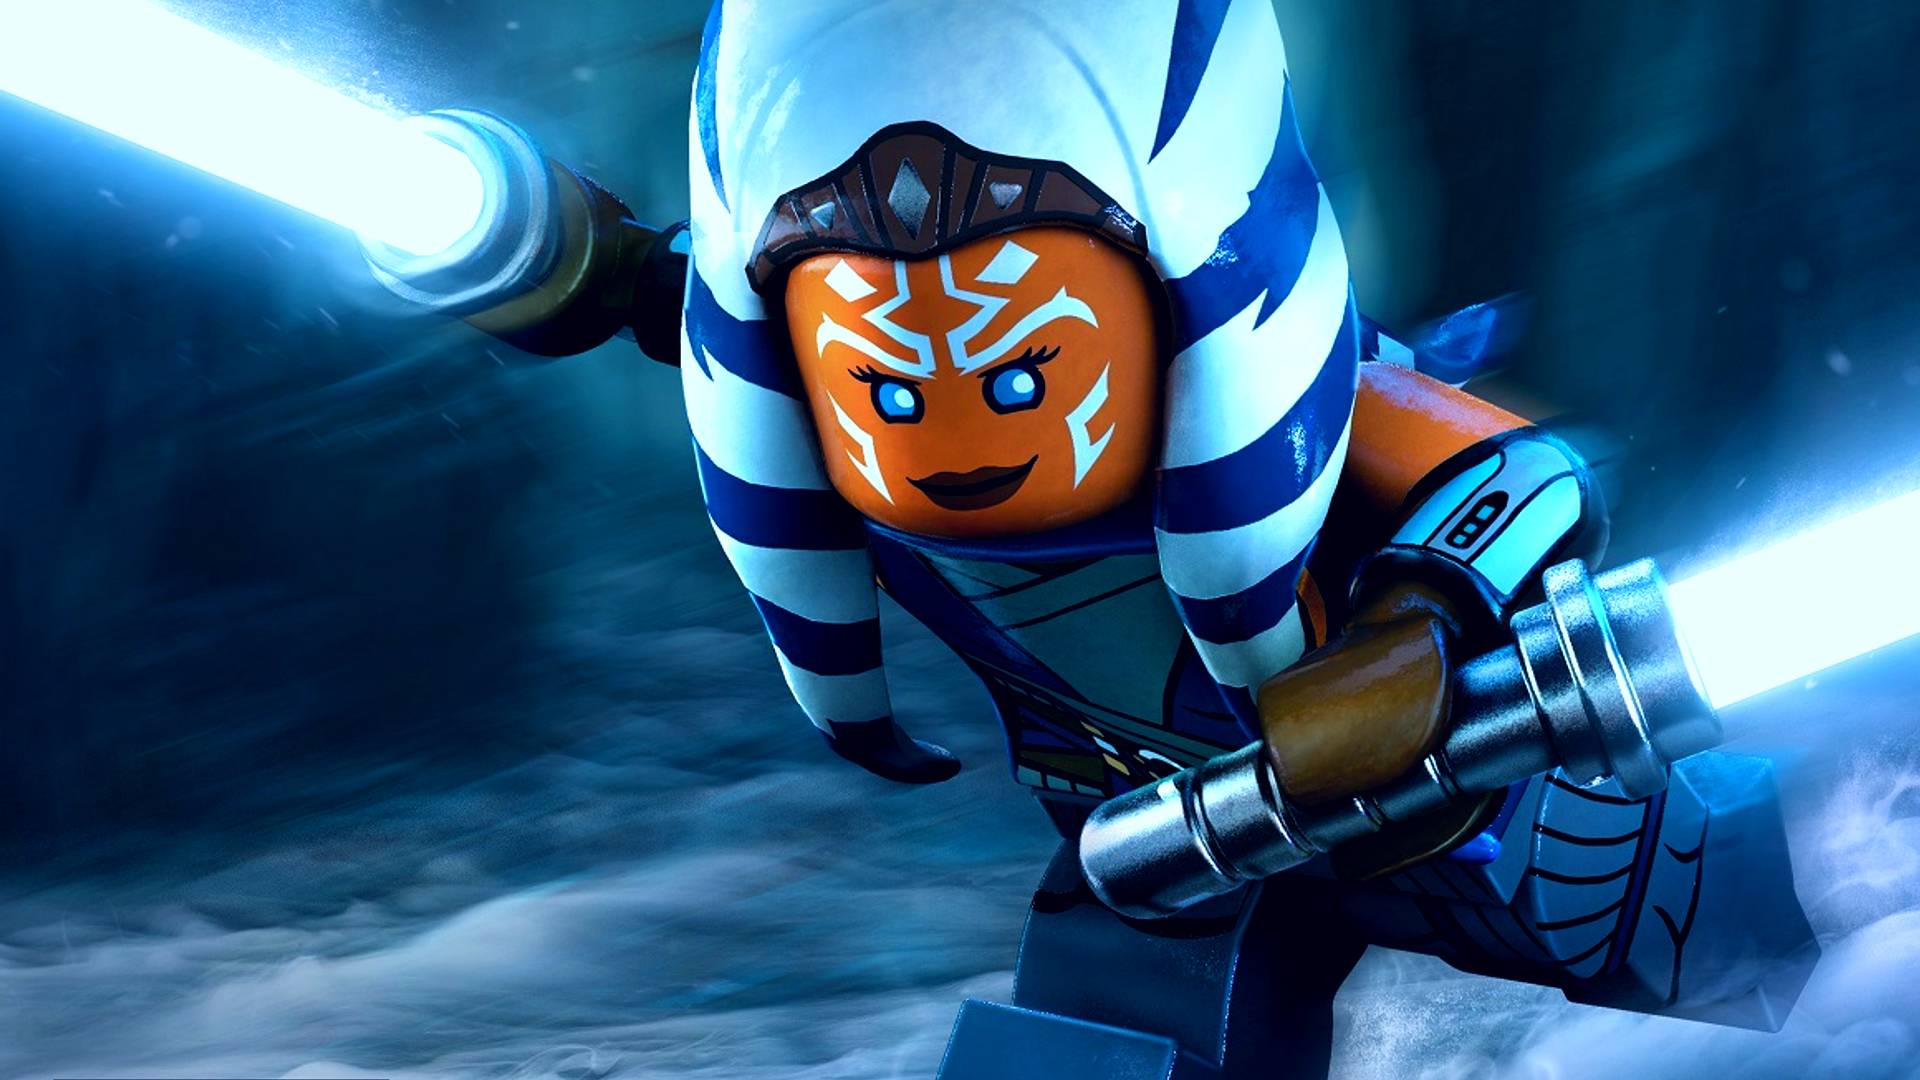 What Multiplayer Options Are in 'Lego Star Wars: The Skywalker Saga'?